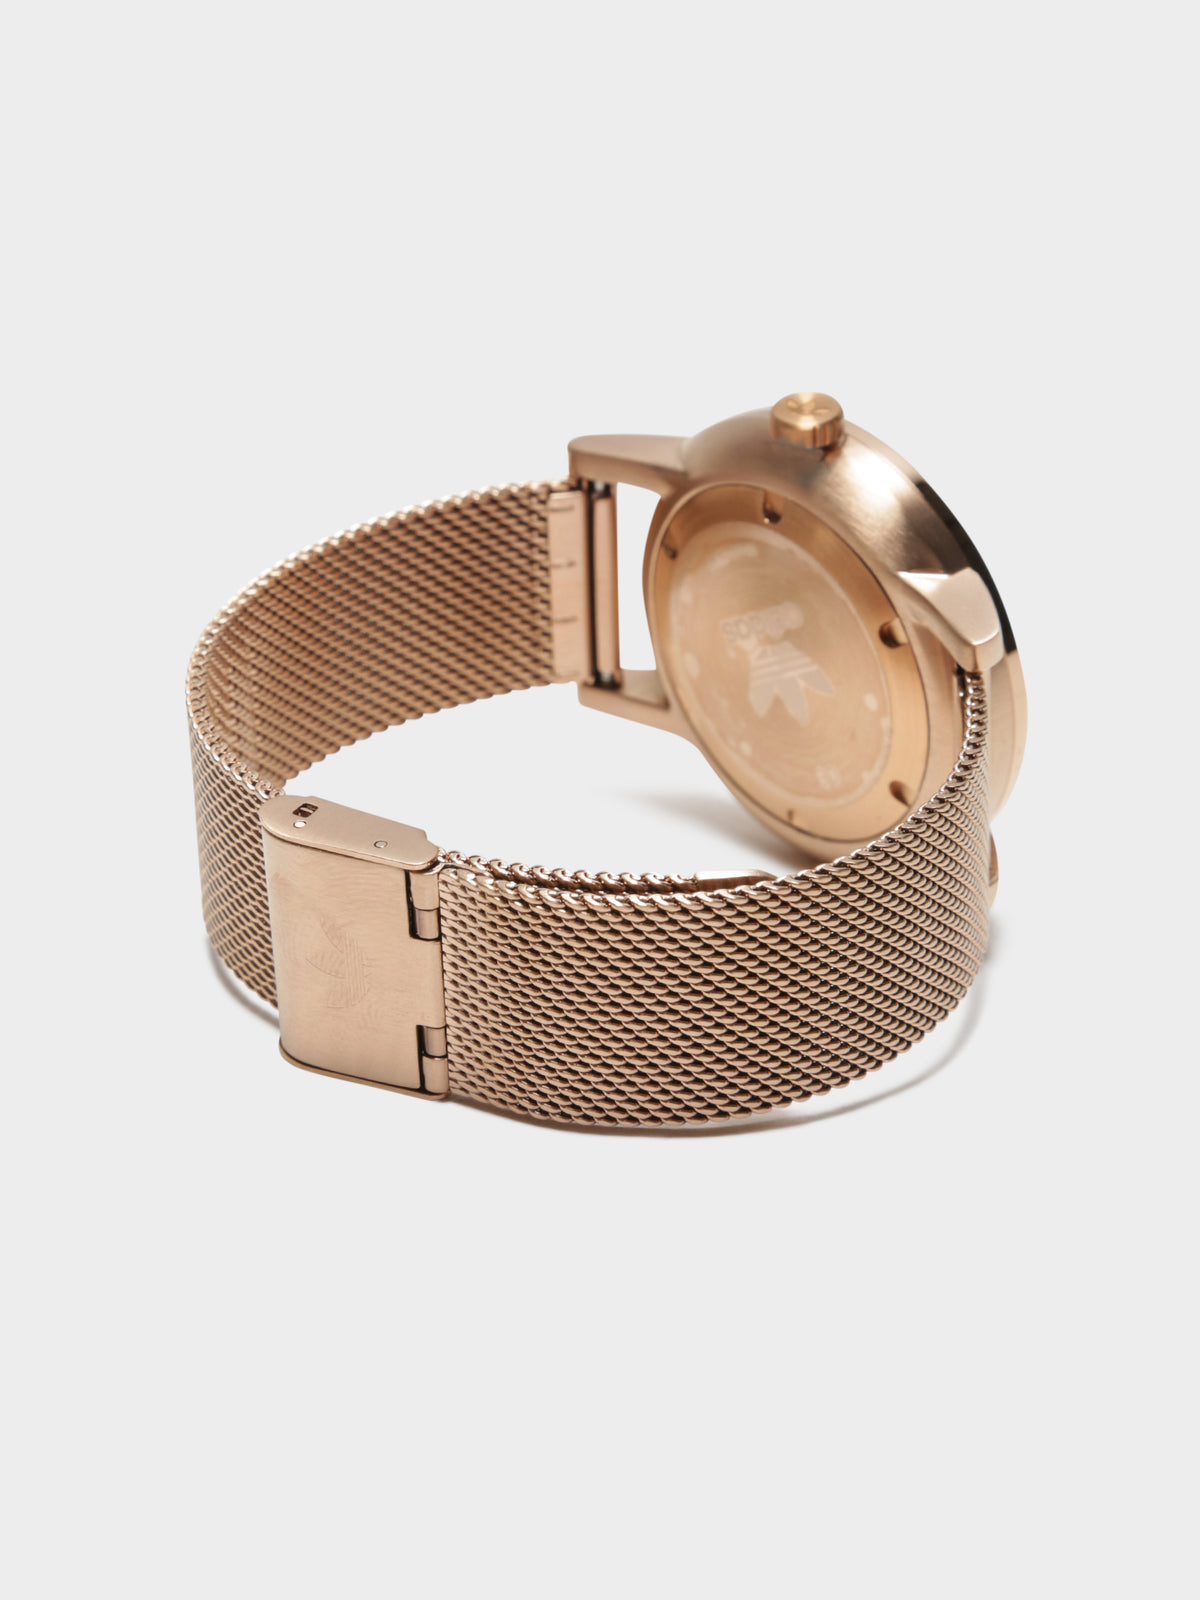 Unisex District_M1 Analog 40mm Watch in Rose Gold